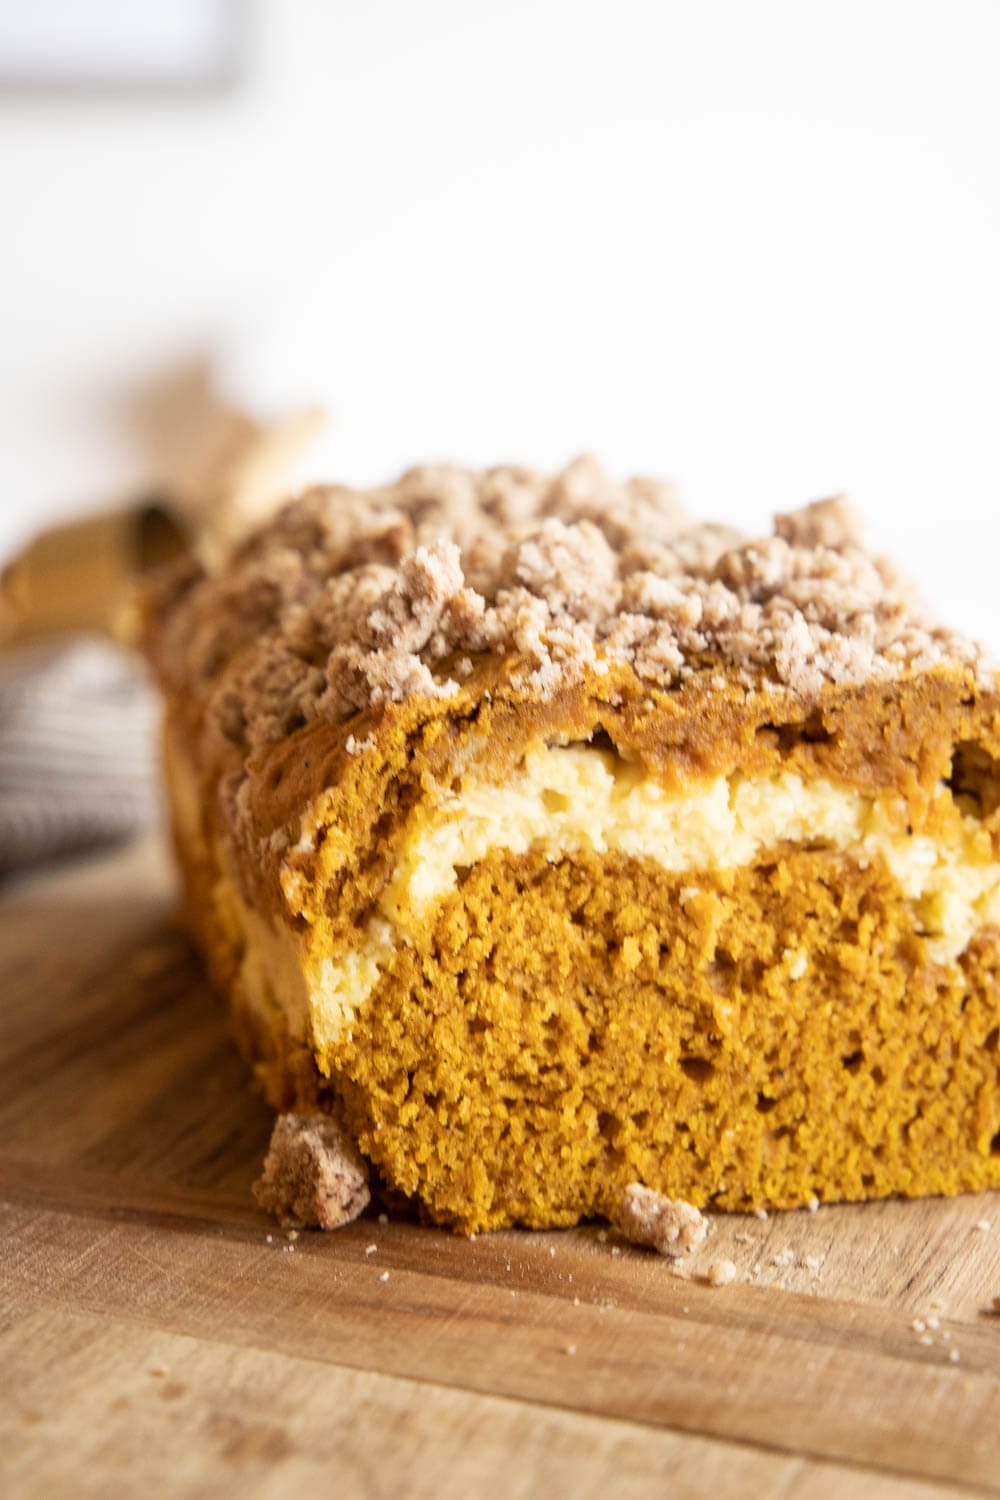 Easy Pumpkin Bread with Cream Cheese Filling